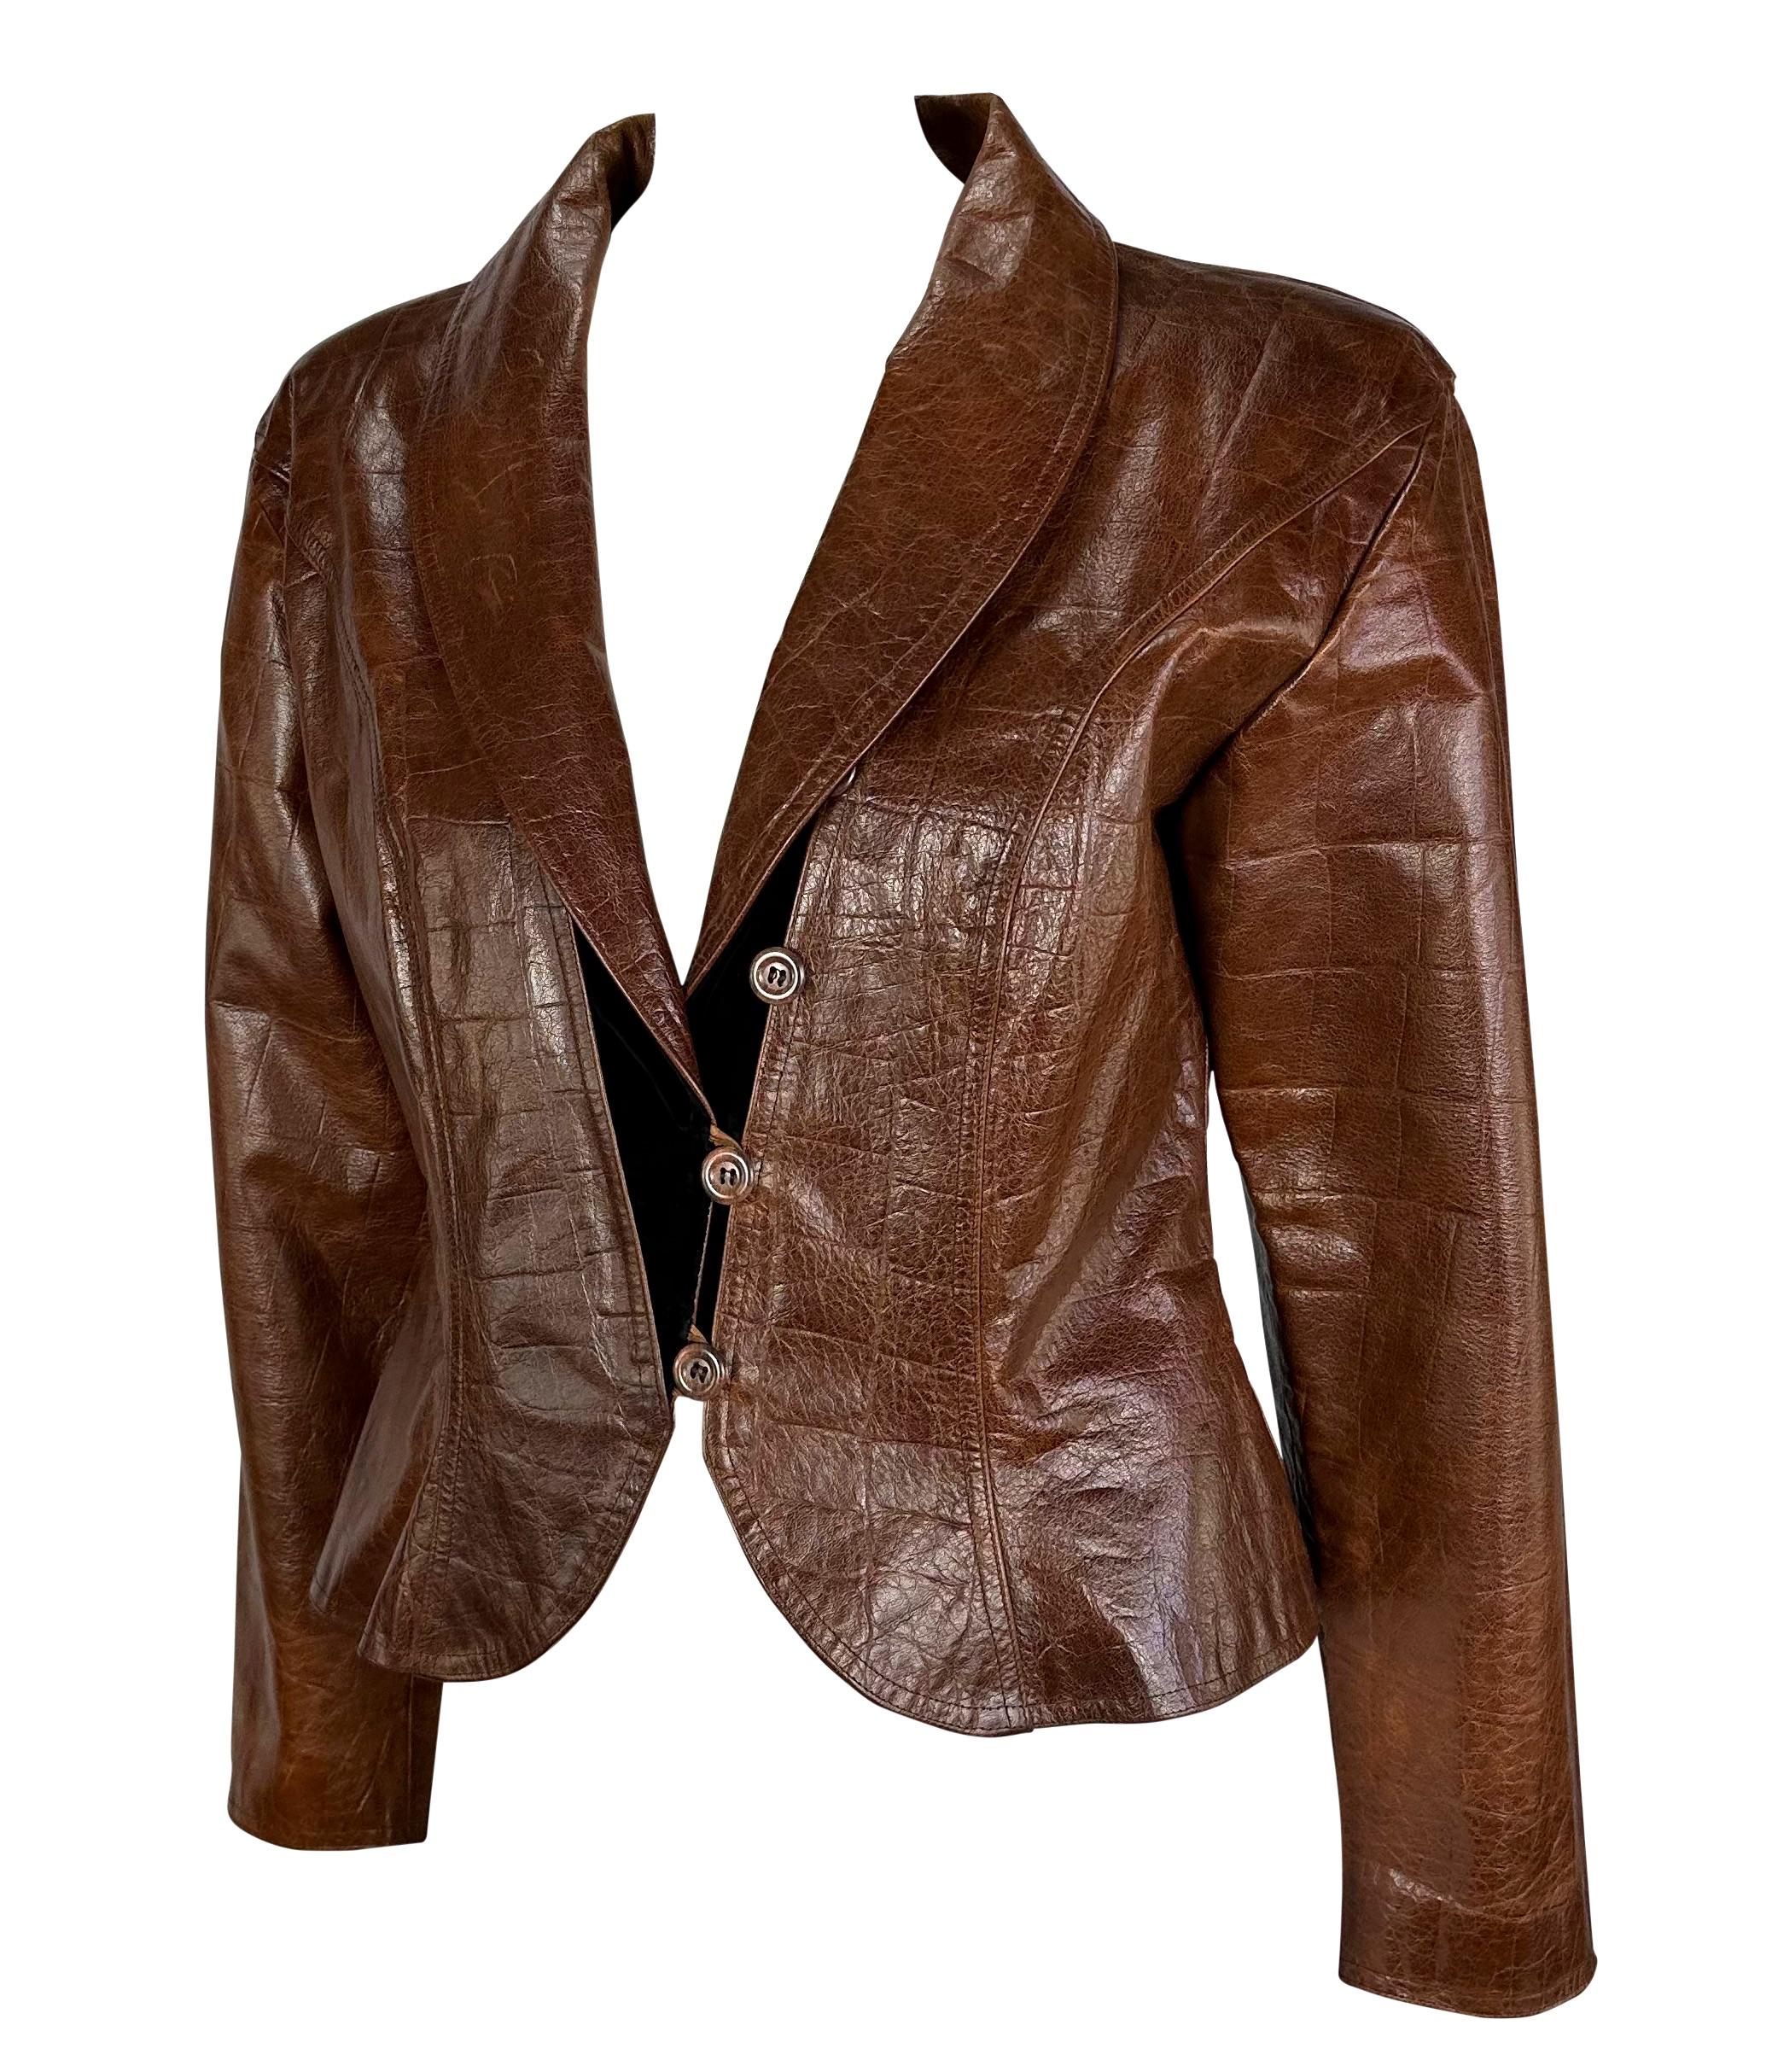 Presenting a fabulous brown crocodile embossed Emanuel Ungaro leather jacket. From the 1980s, this incredible jacket features a peplum flare hem, black velvet detailing, and a shawl lapel. Add this fabulous vintage piece to your wardrobe!